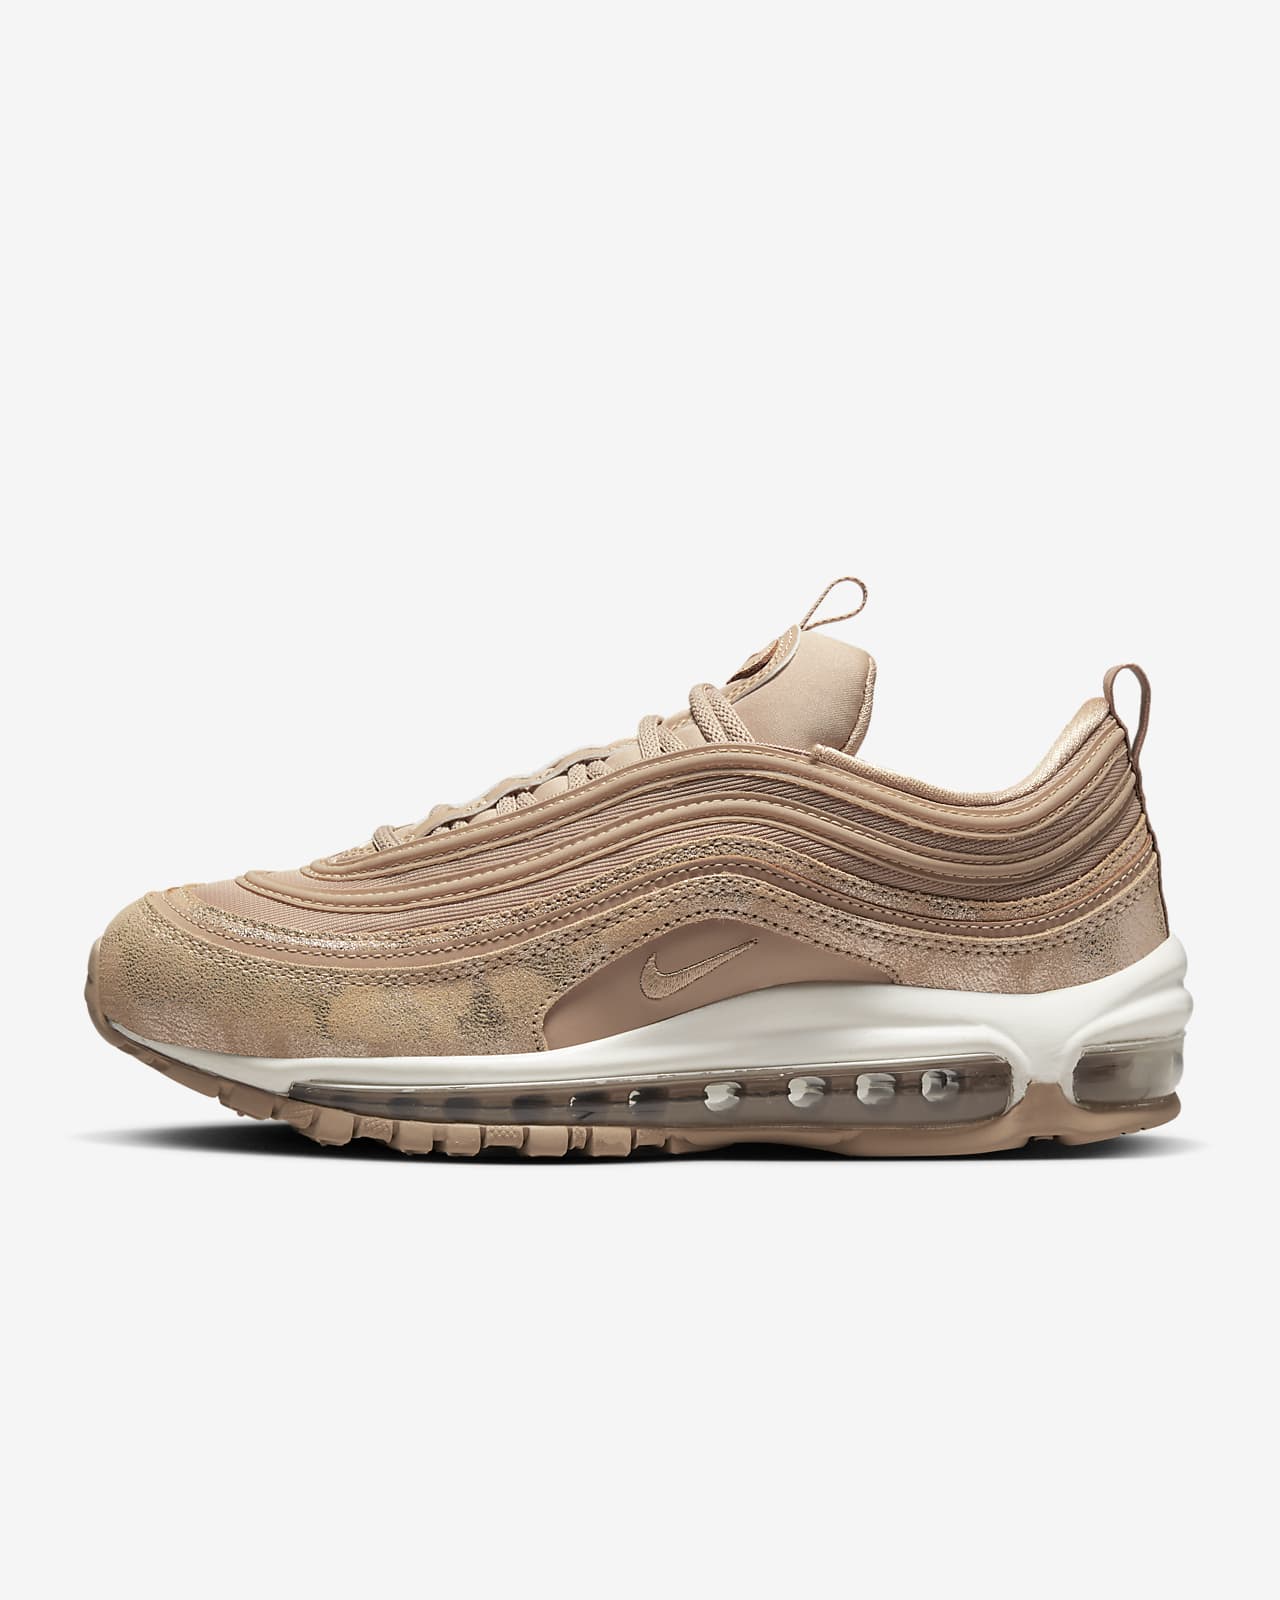 oscuridad Parpadeo visual Chaussure Nike Air Max 97 pour femme. Nike BE